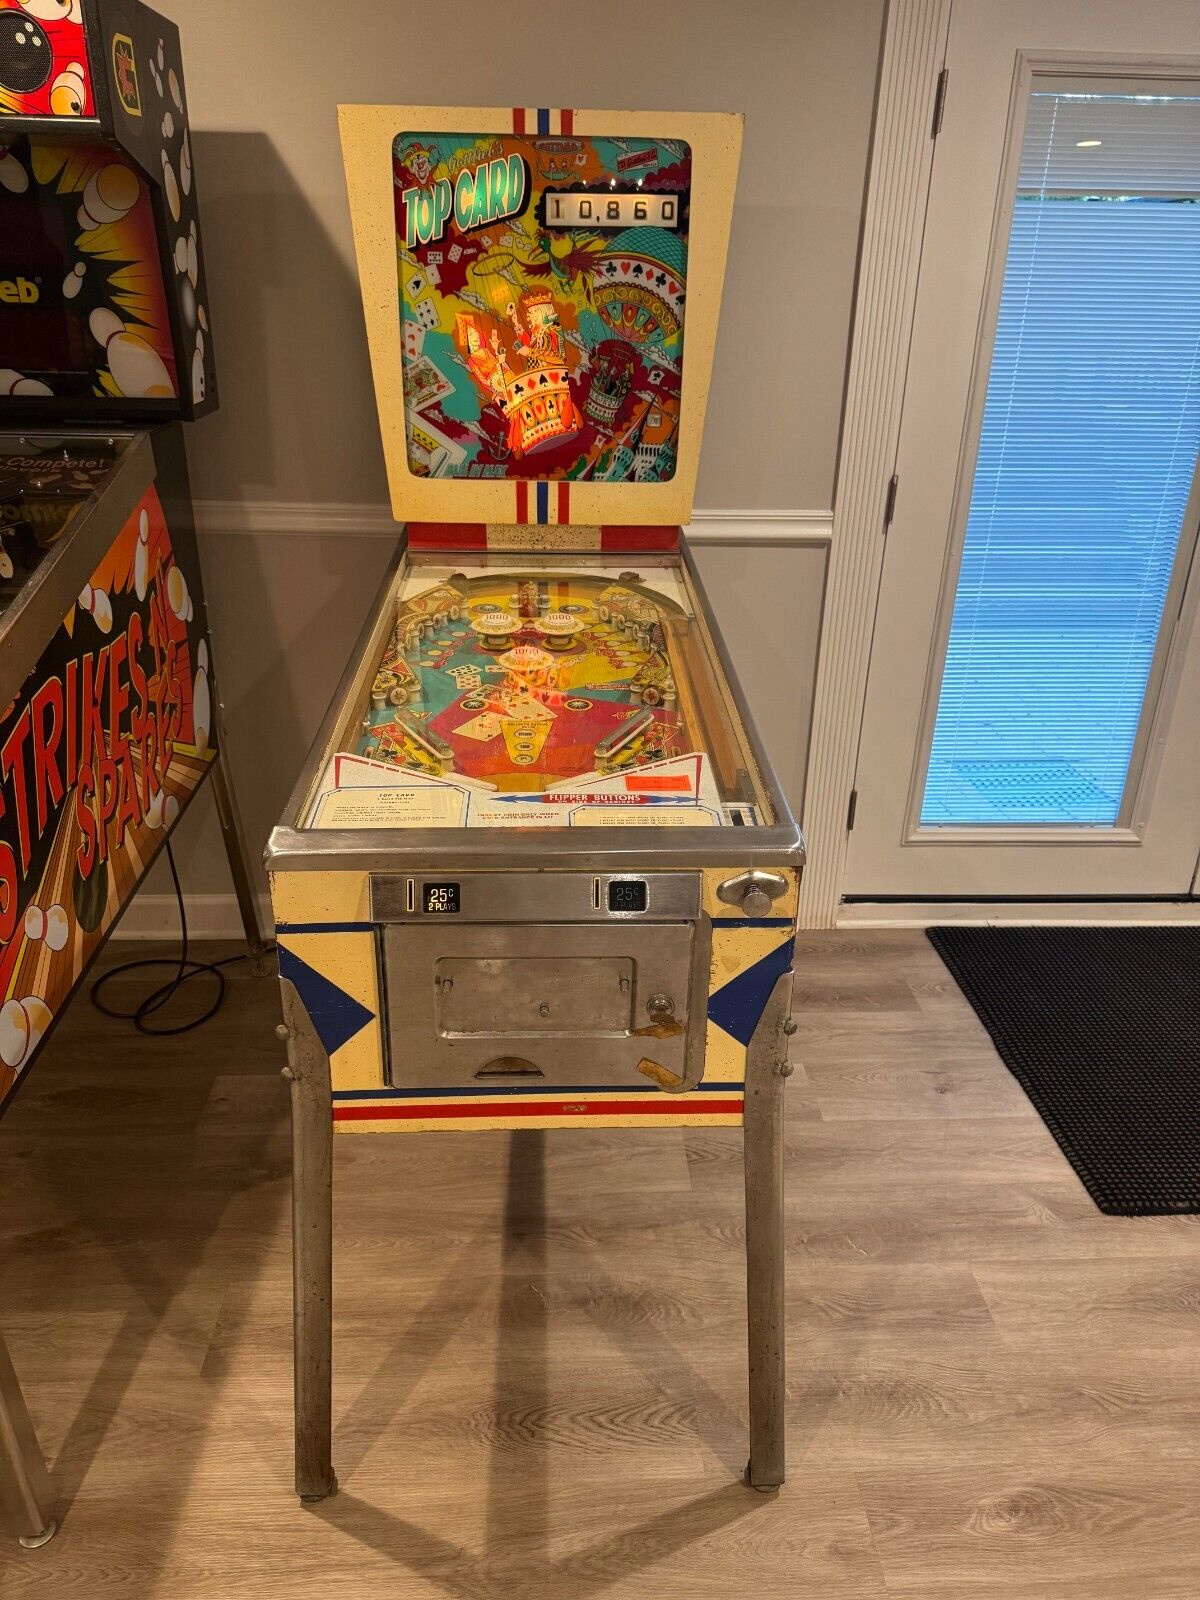 Gottlieb Top Card Model Year 1974 Pinball Machine Used Pick-Up Only